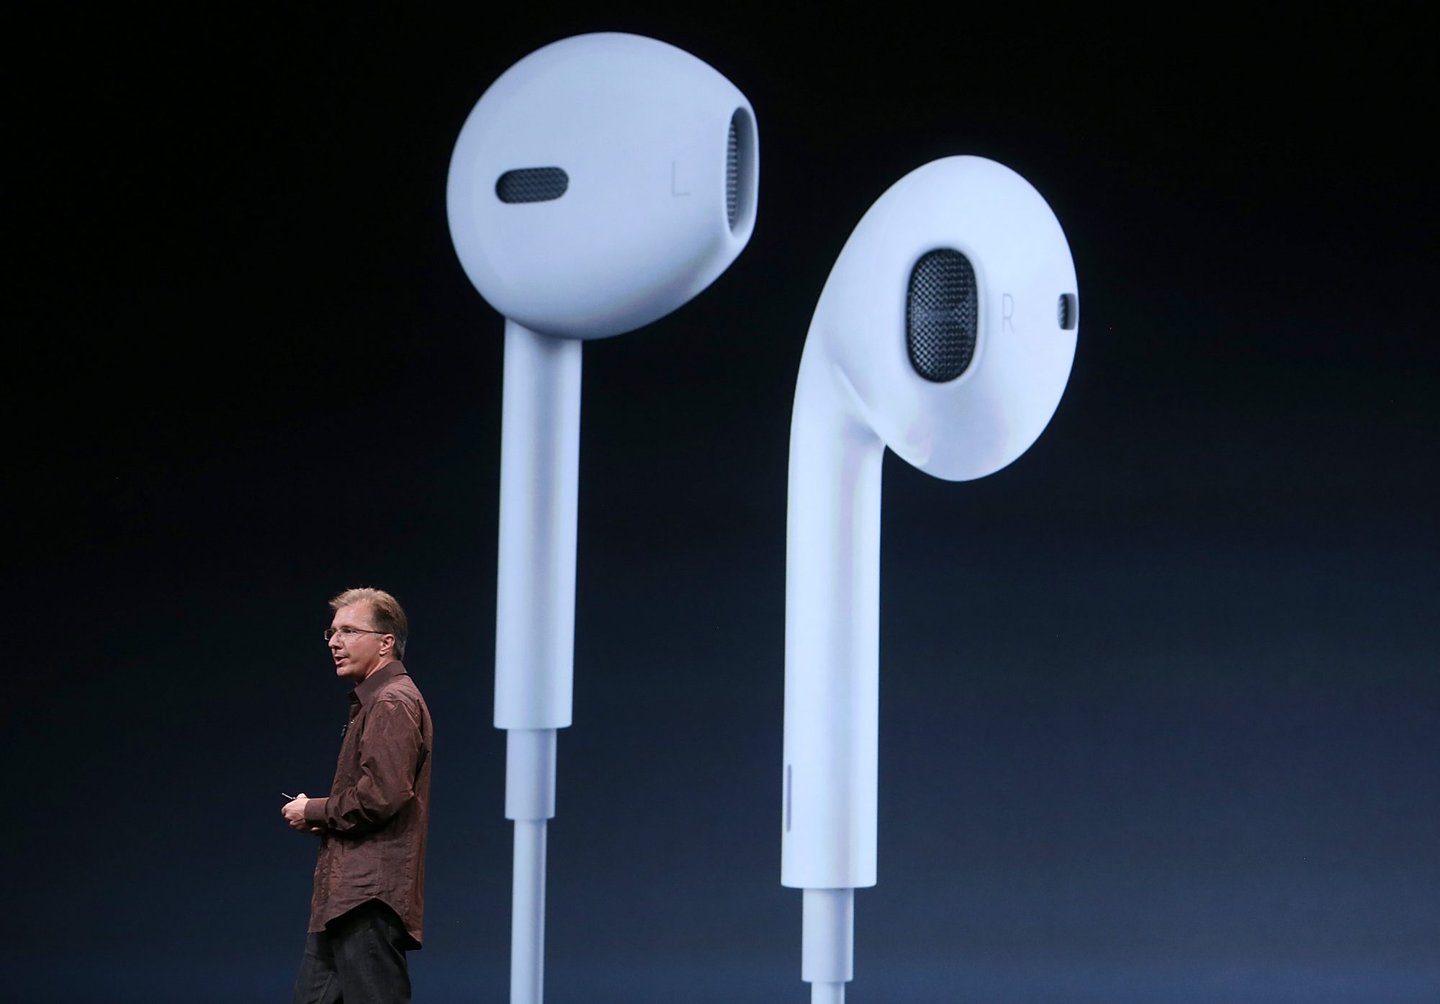 SAN FRANCISCO, CA - SEPTEMBER 12: Apple Vice President of iPod and iPhone Product Marketing Greg Joswiak, announces new Apple earphones called EarPods during an Apple special event at the Yerba Buena Center for the Arts on September 12, 2012 in San Francisco, California. Apple announced the iPhone 5, the latest version of the popular smart phone as well as new updated versions of the iPod Nano, Shuffle and Touch. (Photo by Justin Sullivan/Getty Images)